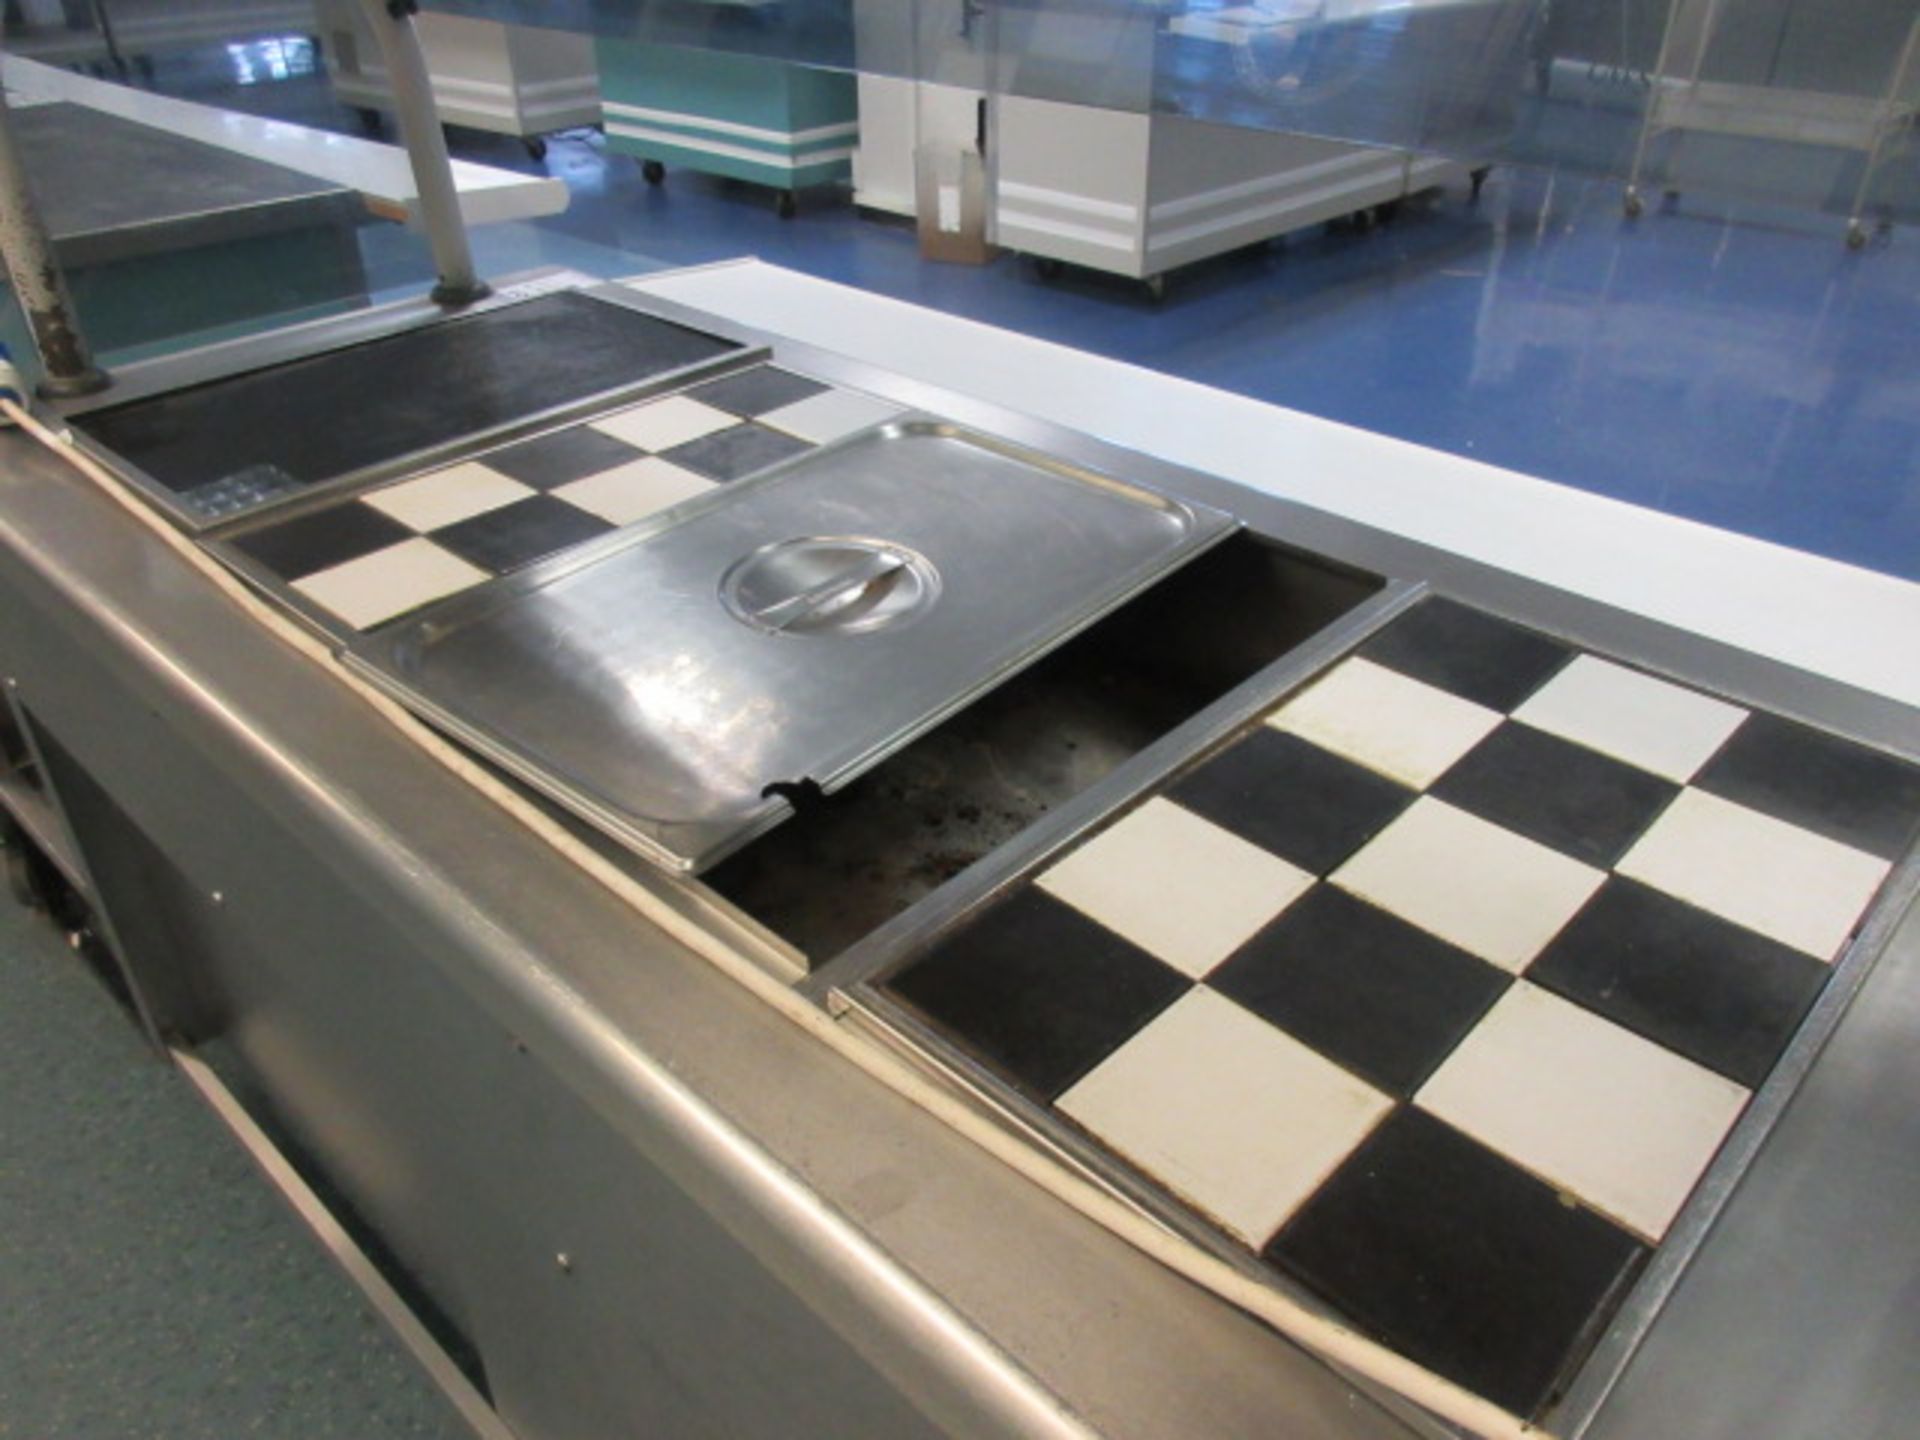 VICTOR 7 UNIT BAIN MARIE WITH TRAY SHELF. FOUR STORAGE UNITS, REFRIGERATED UNIT, HEATED 7 POT - Image 3 of 6